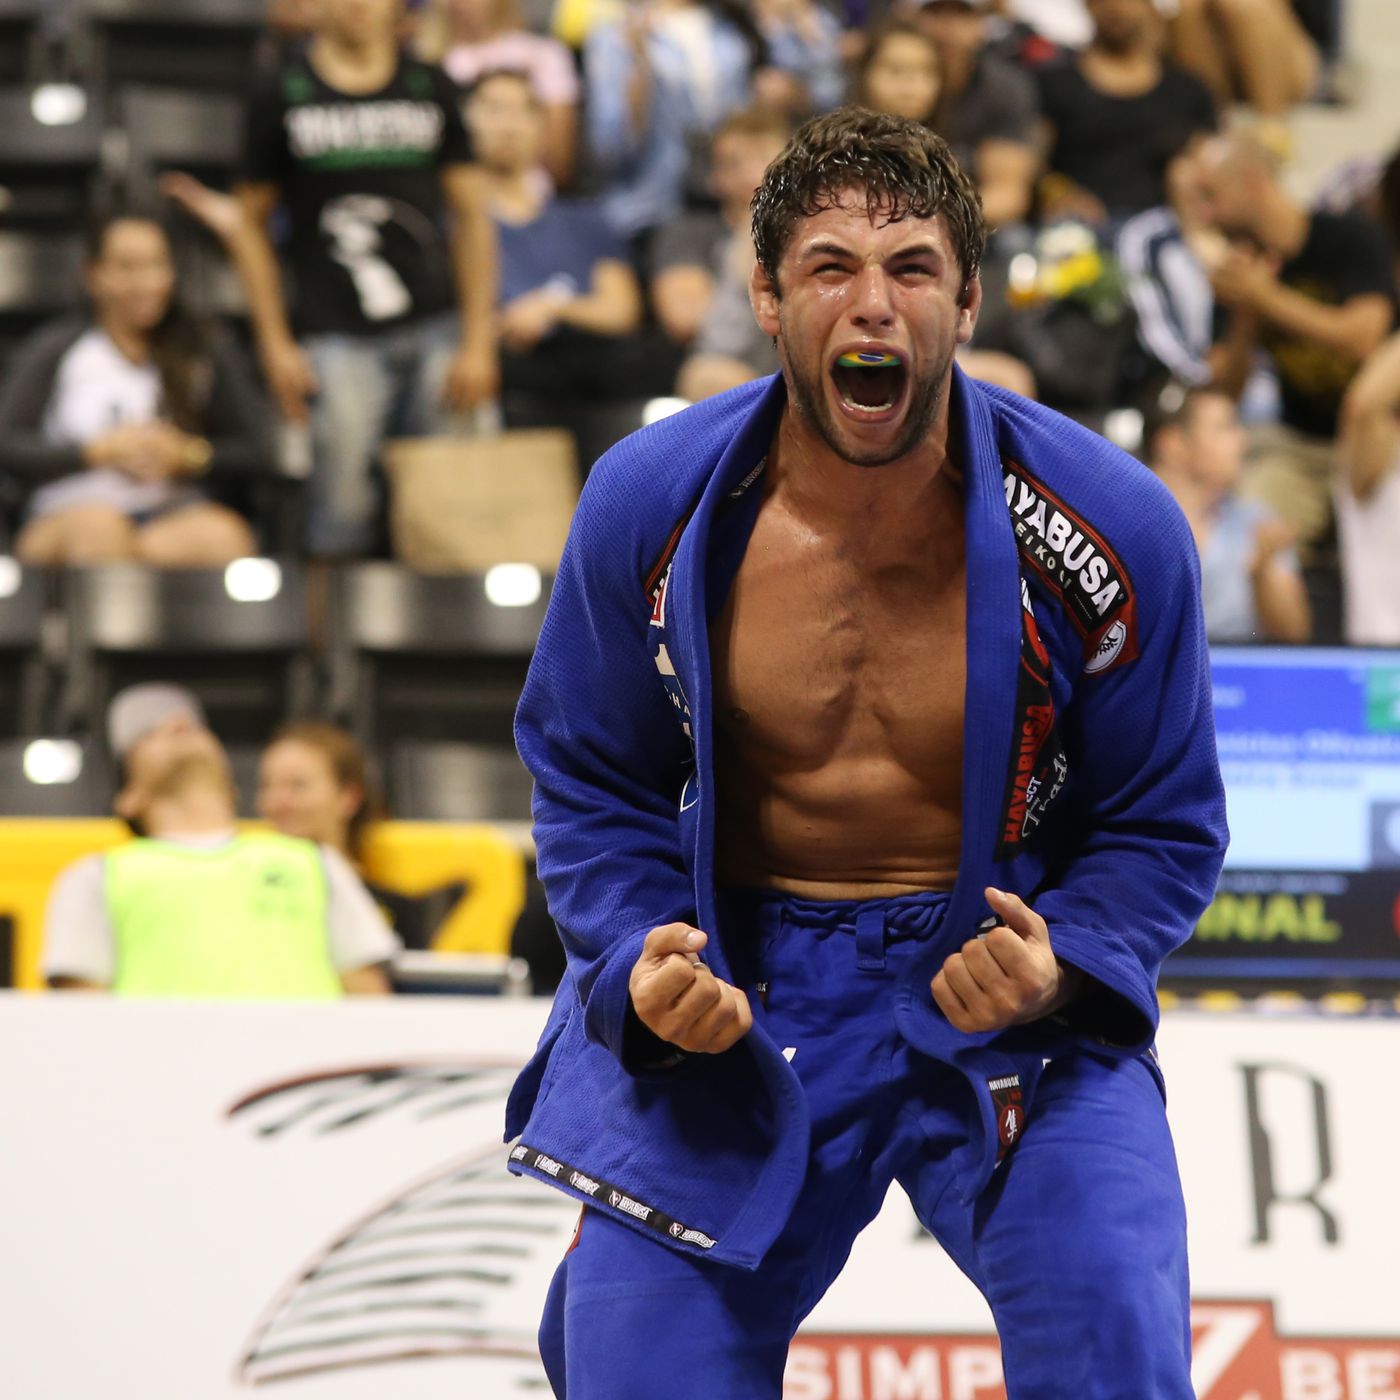 BJJ legend Marcus Buchecha considered not making jump to MMA after